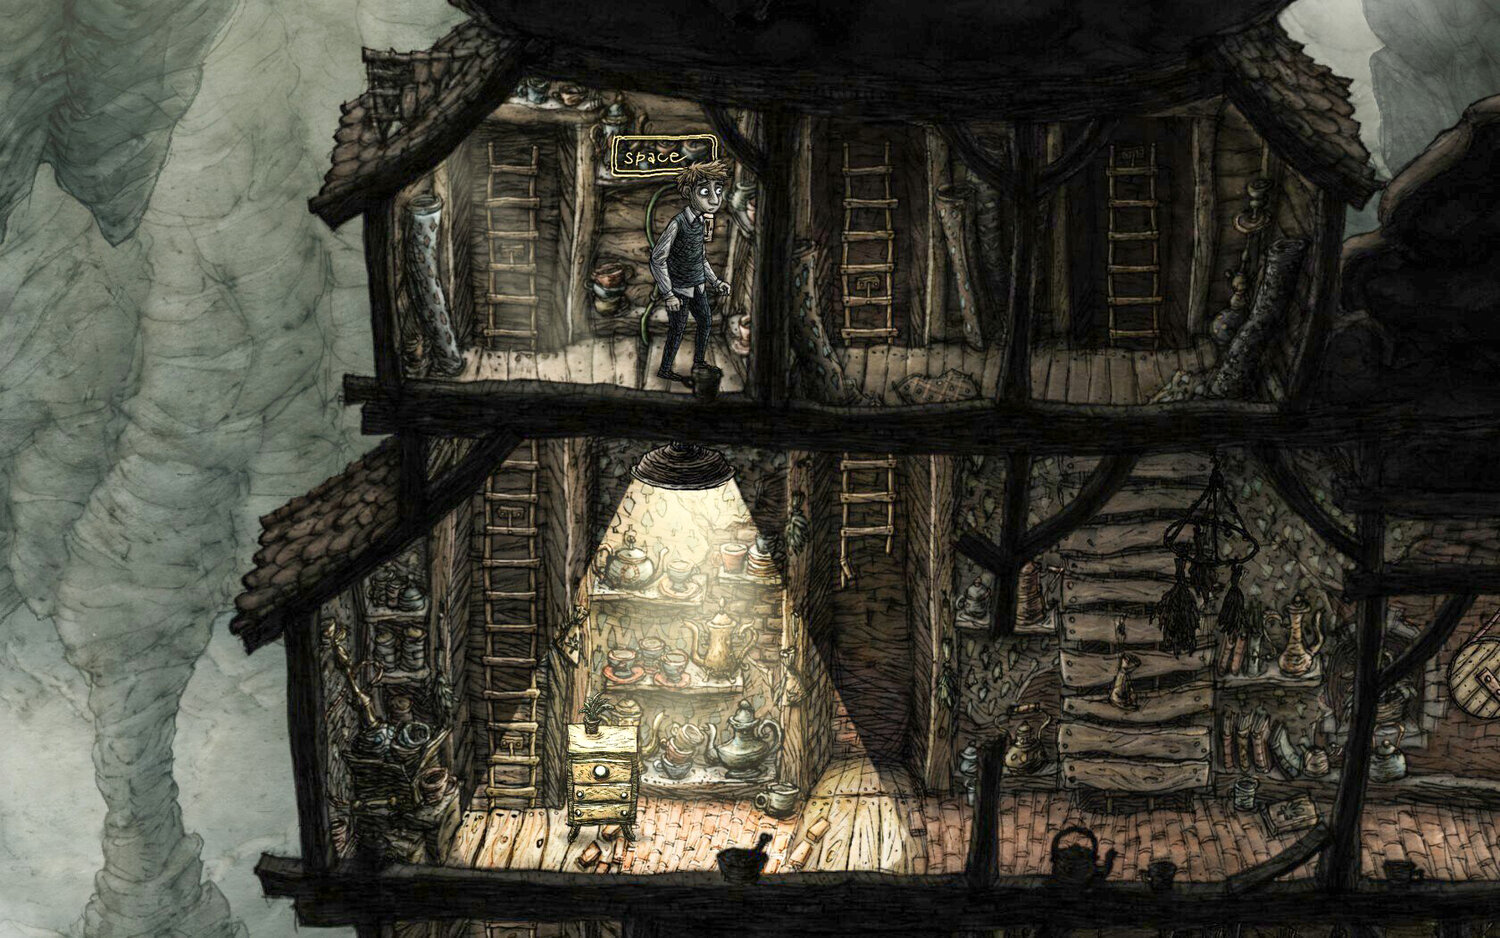 Photo courtesy Amanita Designs

Creaks gameplay is very simple, and the hand-drawn visuals are amazing.